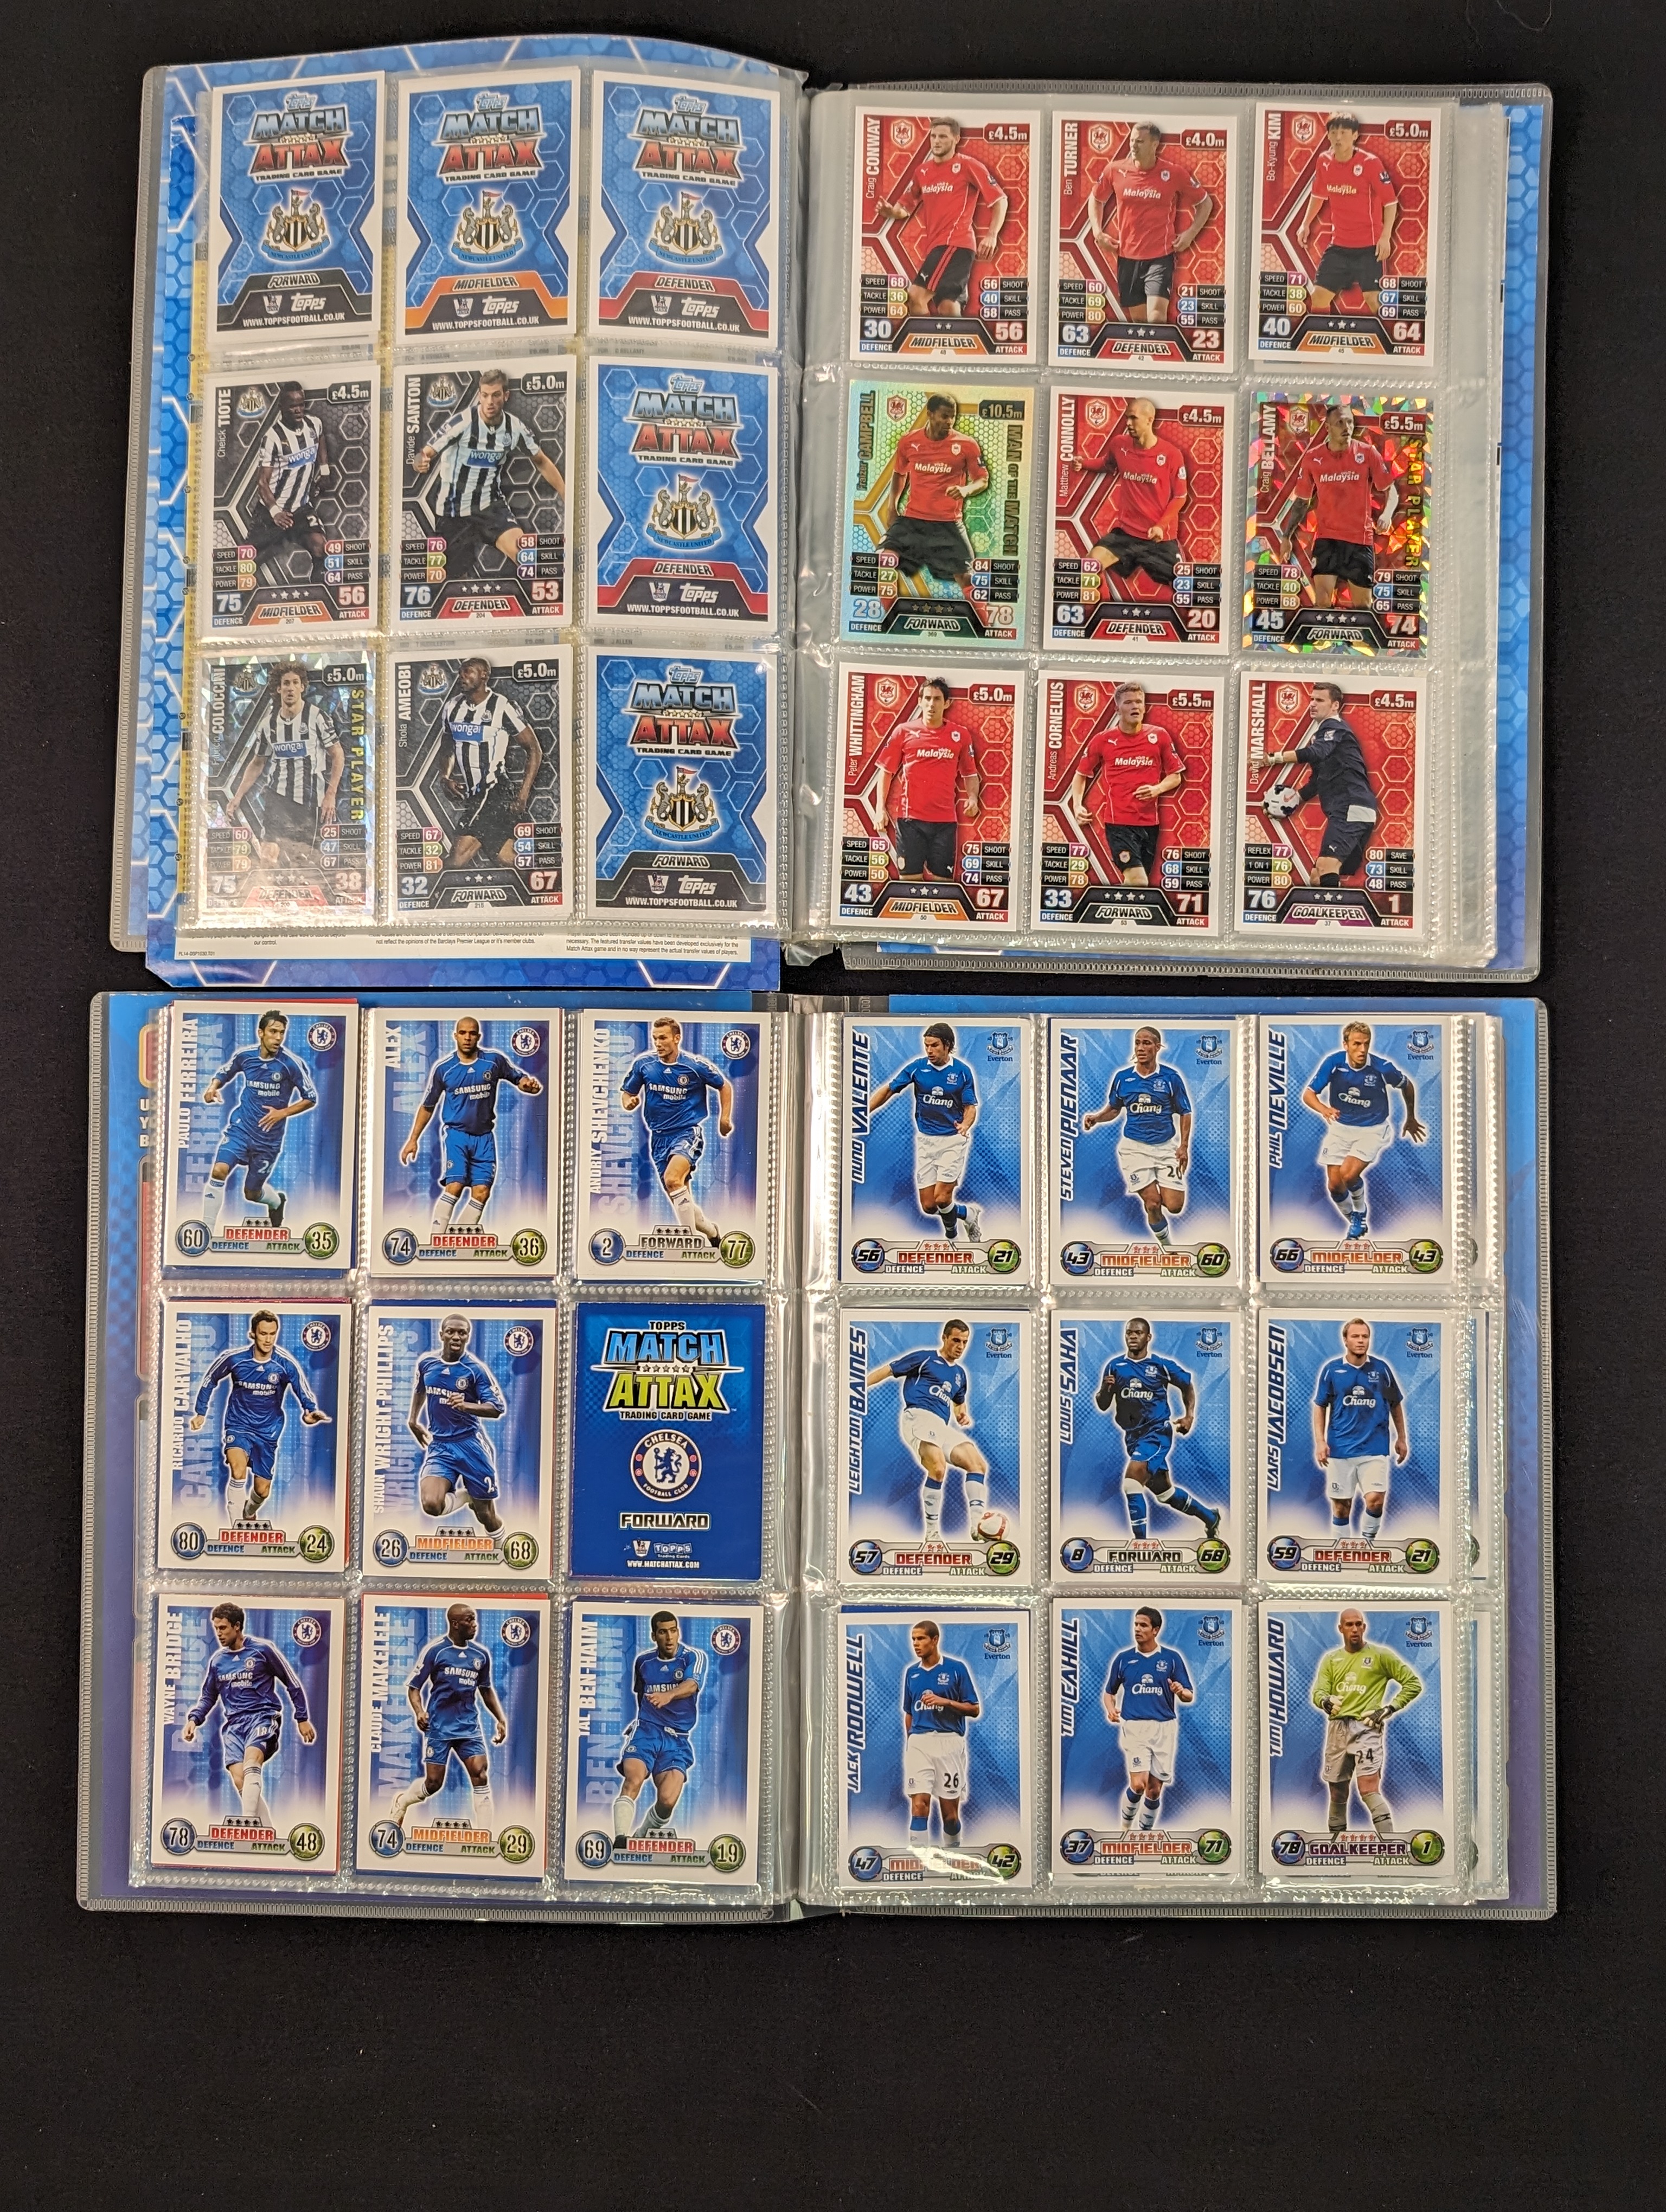 Collection of football memorabilia to include Topps Match Attax trading cards 2008/09 185 cards in